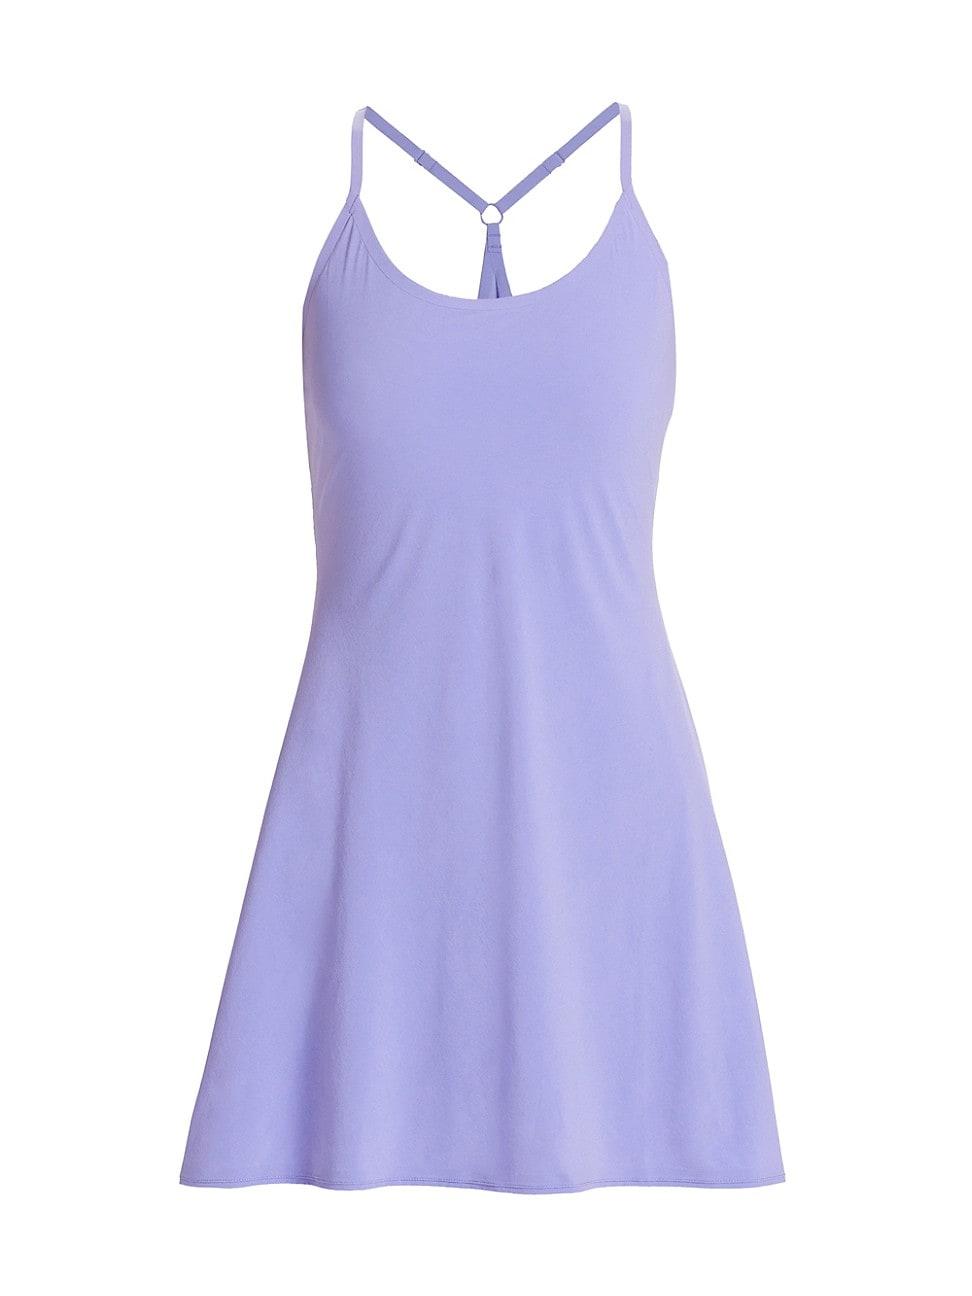 Purple 'The Exercise' Dress